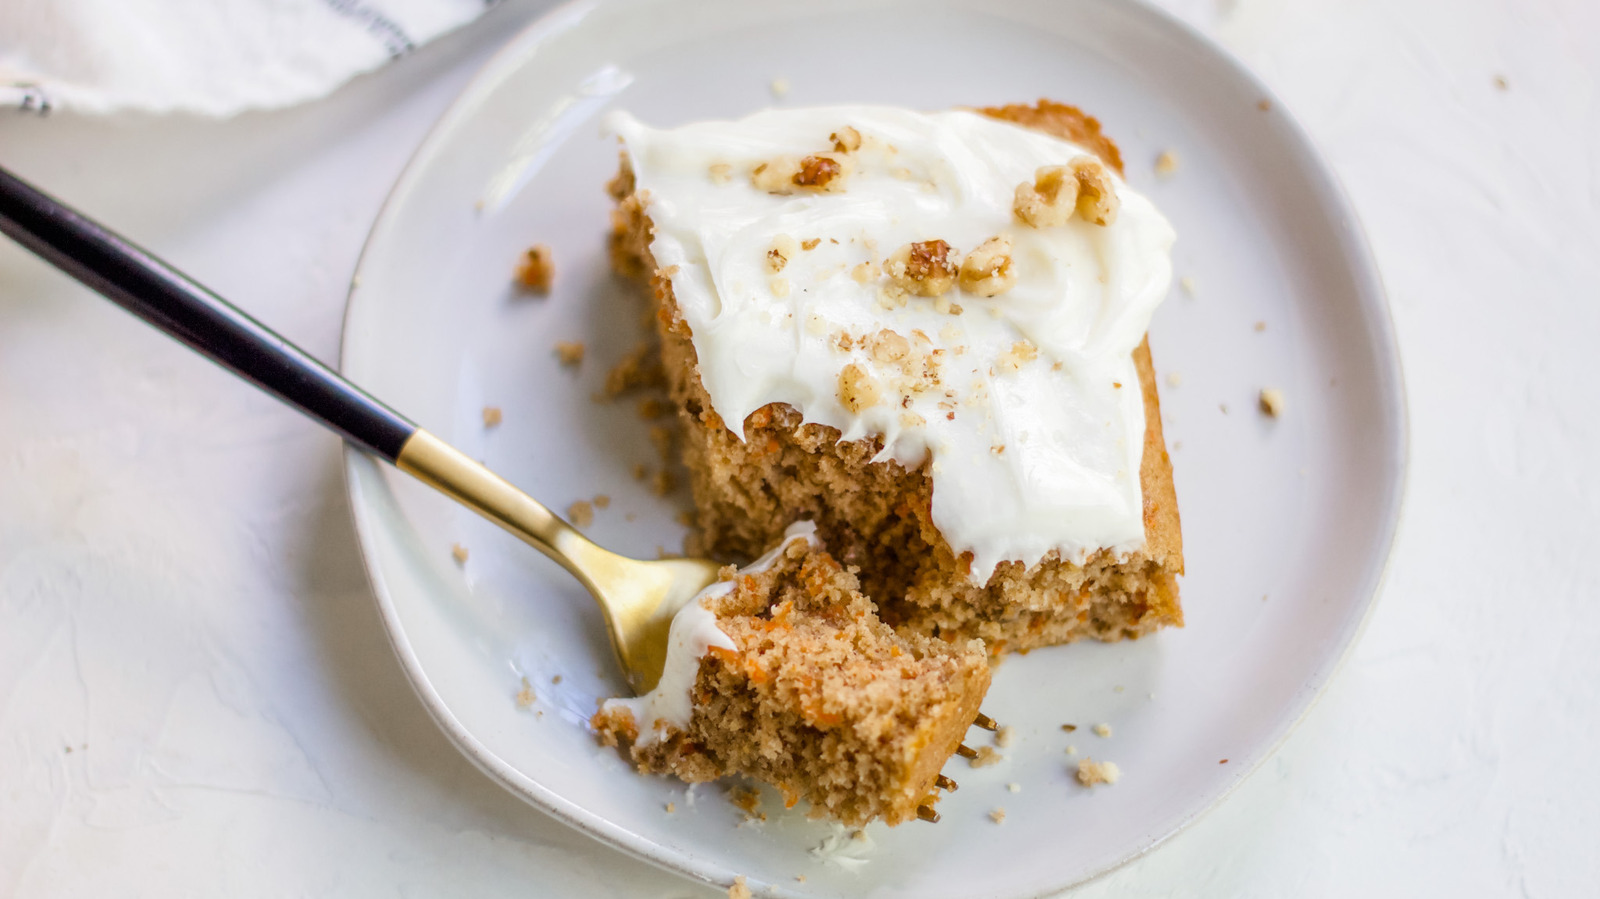 I Tried Four Popular Carrot Cake Recipes and Found the Best One | The Kitchn